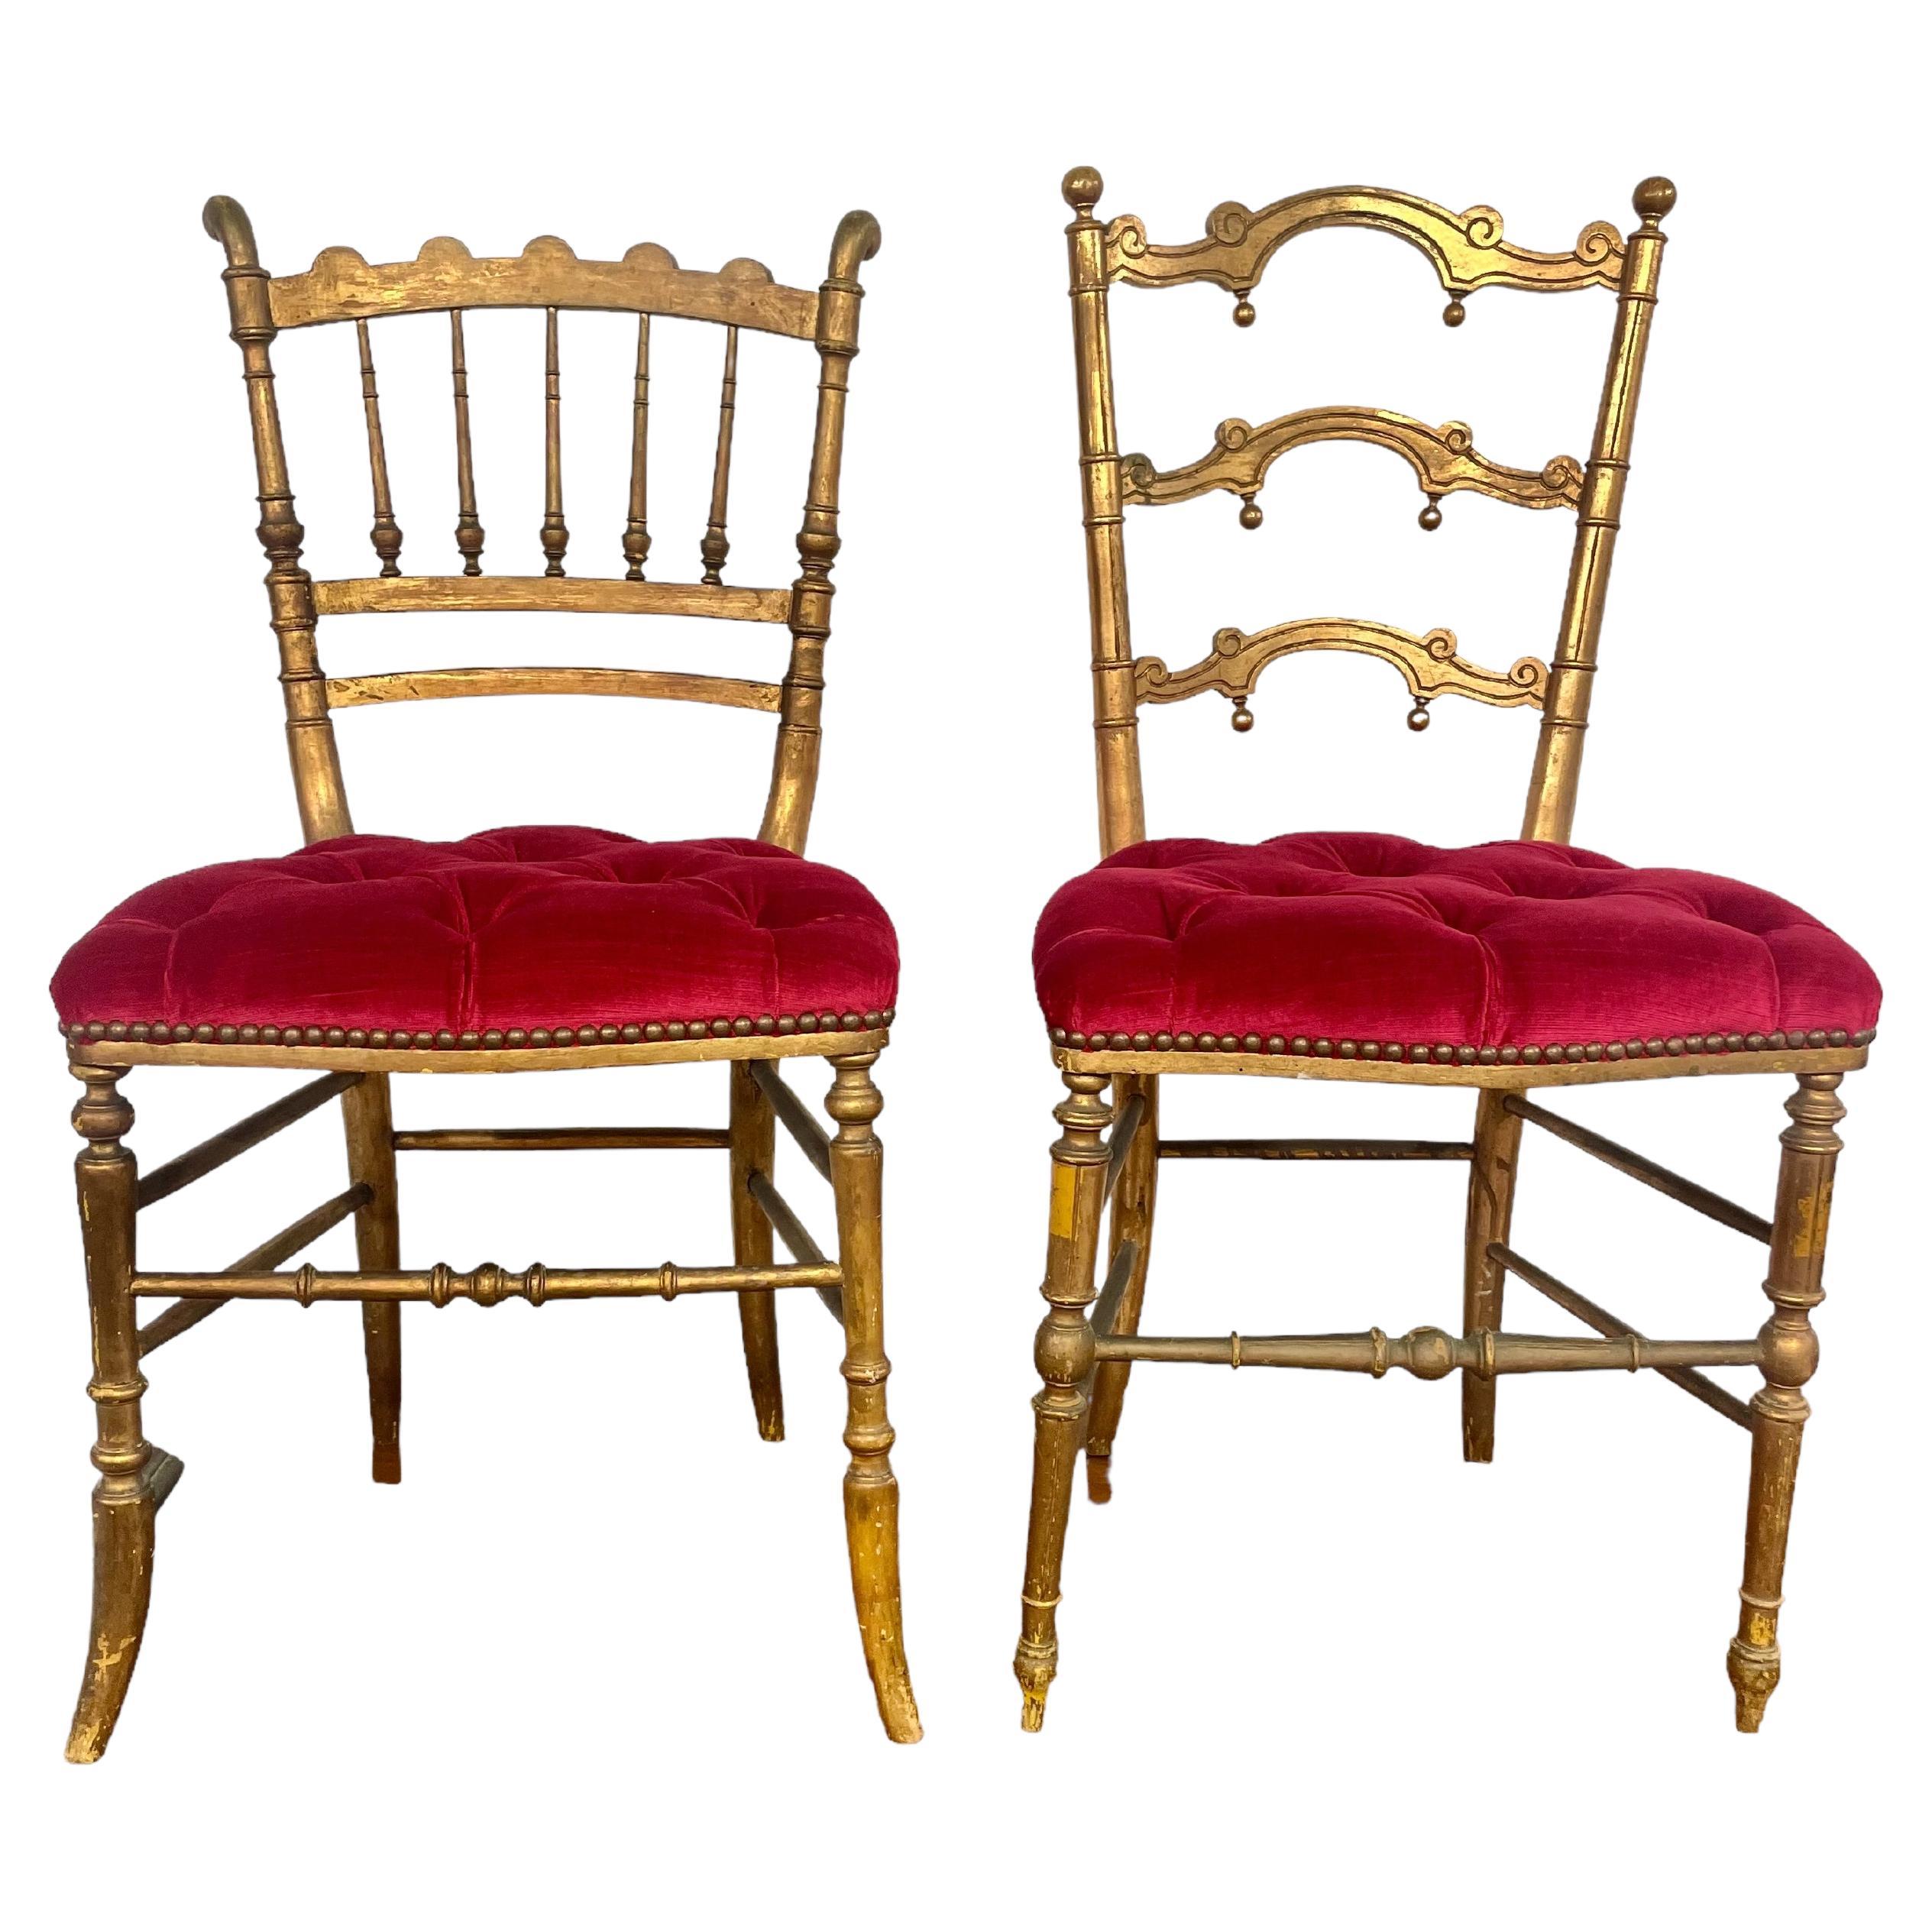 1880s Set of 2 French Giltwood Opera Chairs 